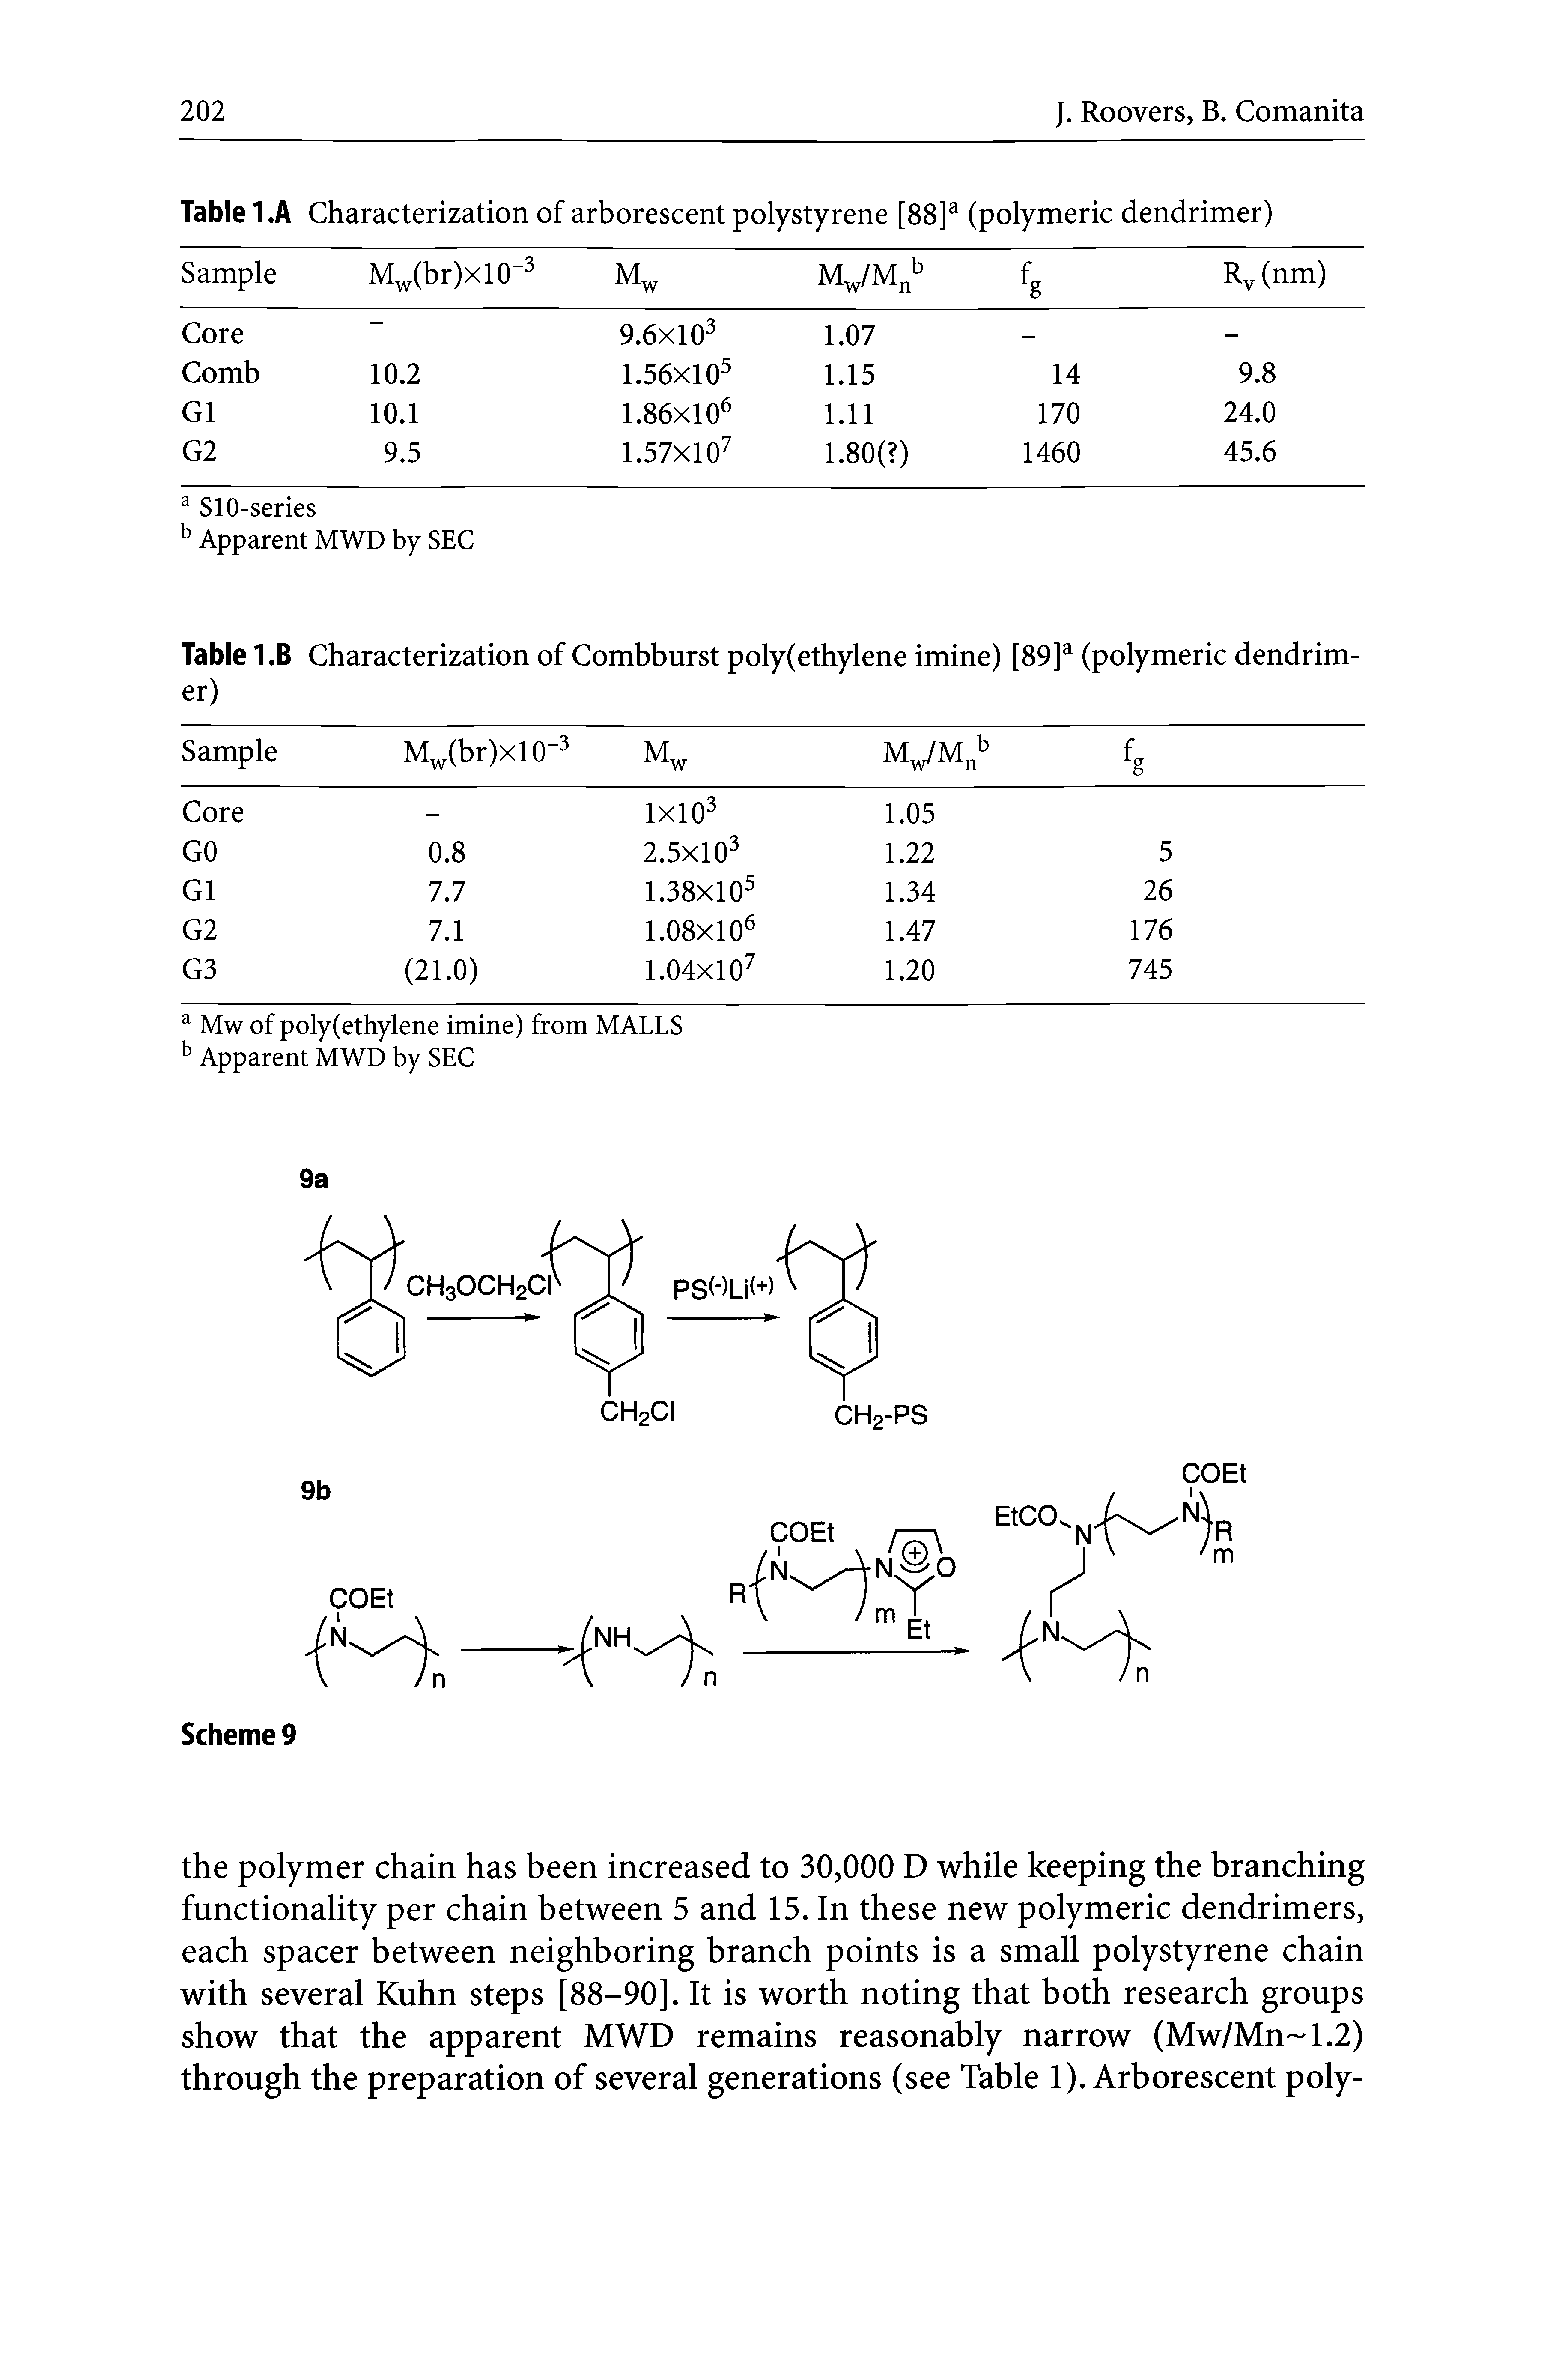 Table 1.A Characterization of arborescent polystyrene [88]a (polymeric dendrimer)...